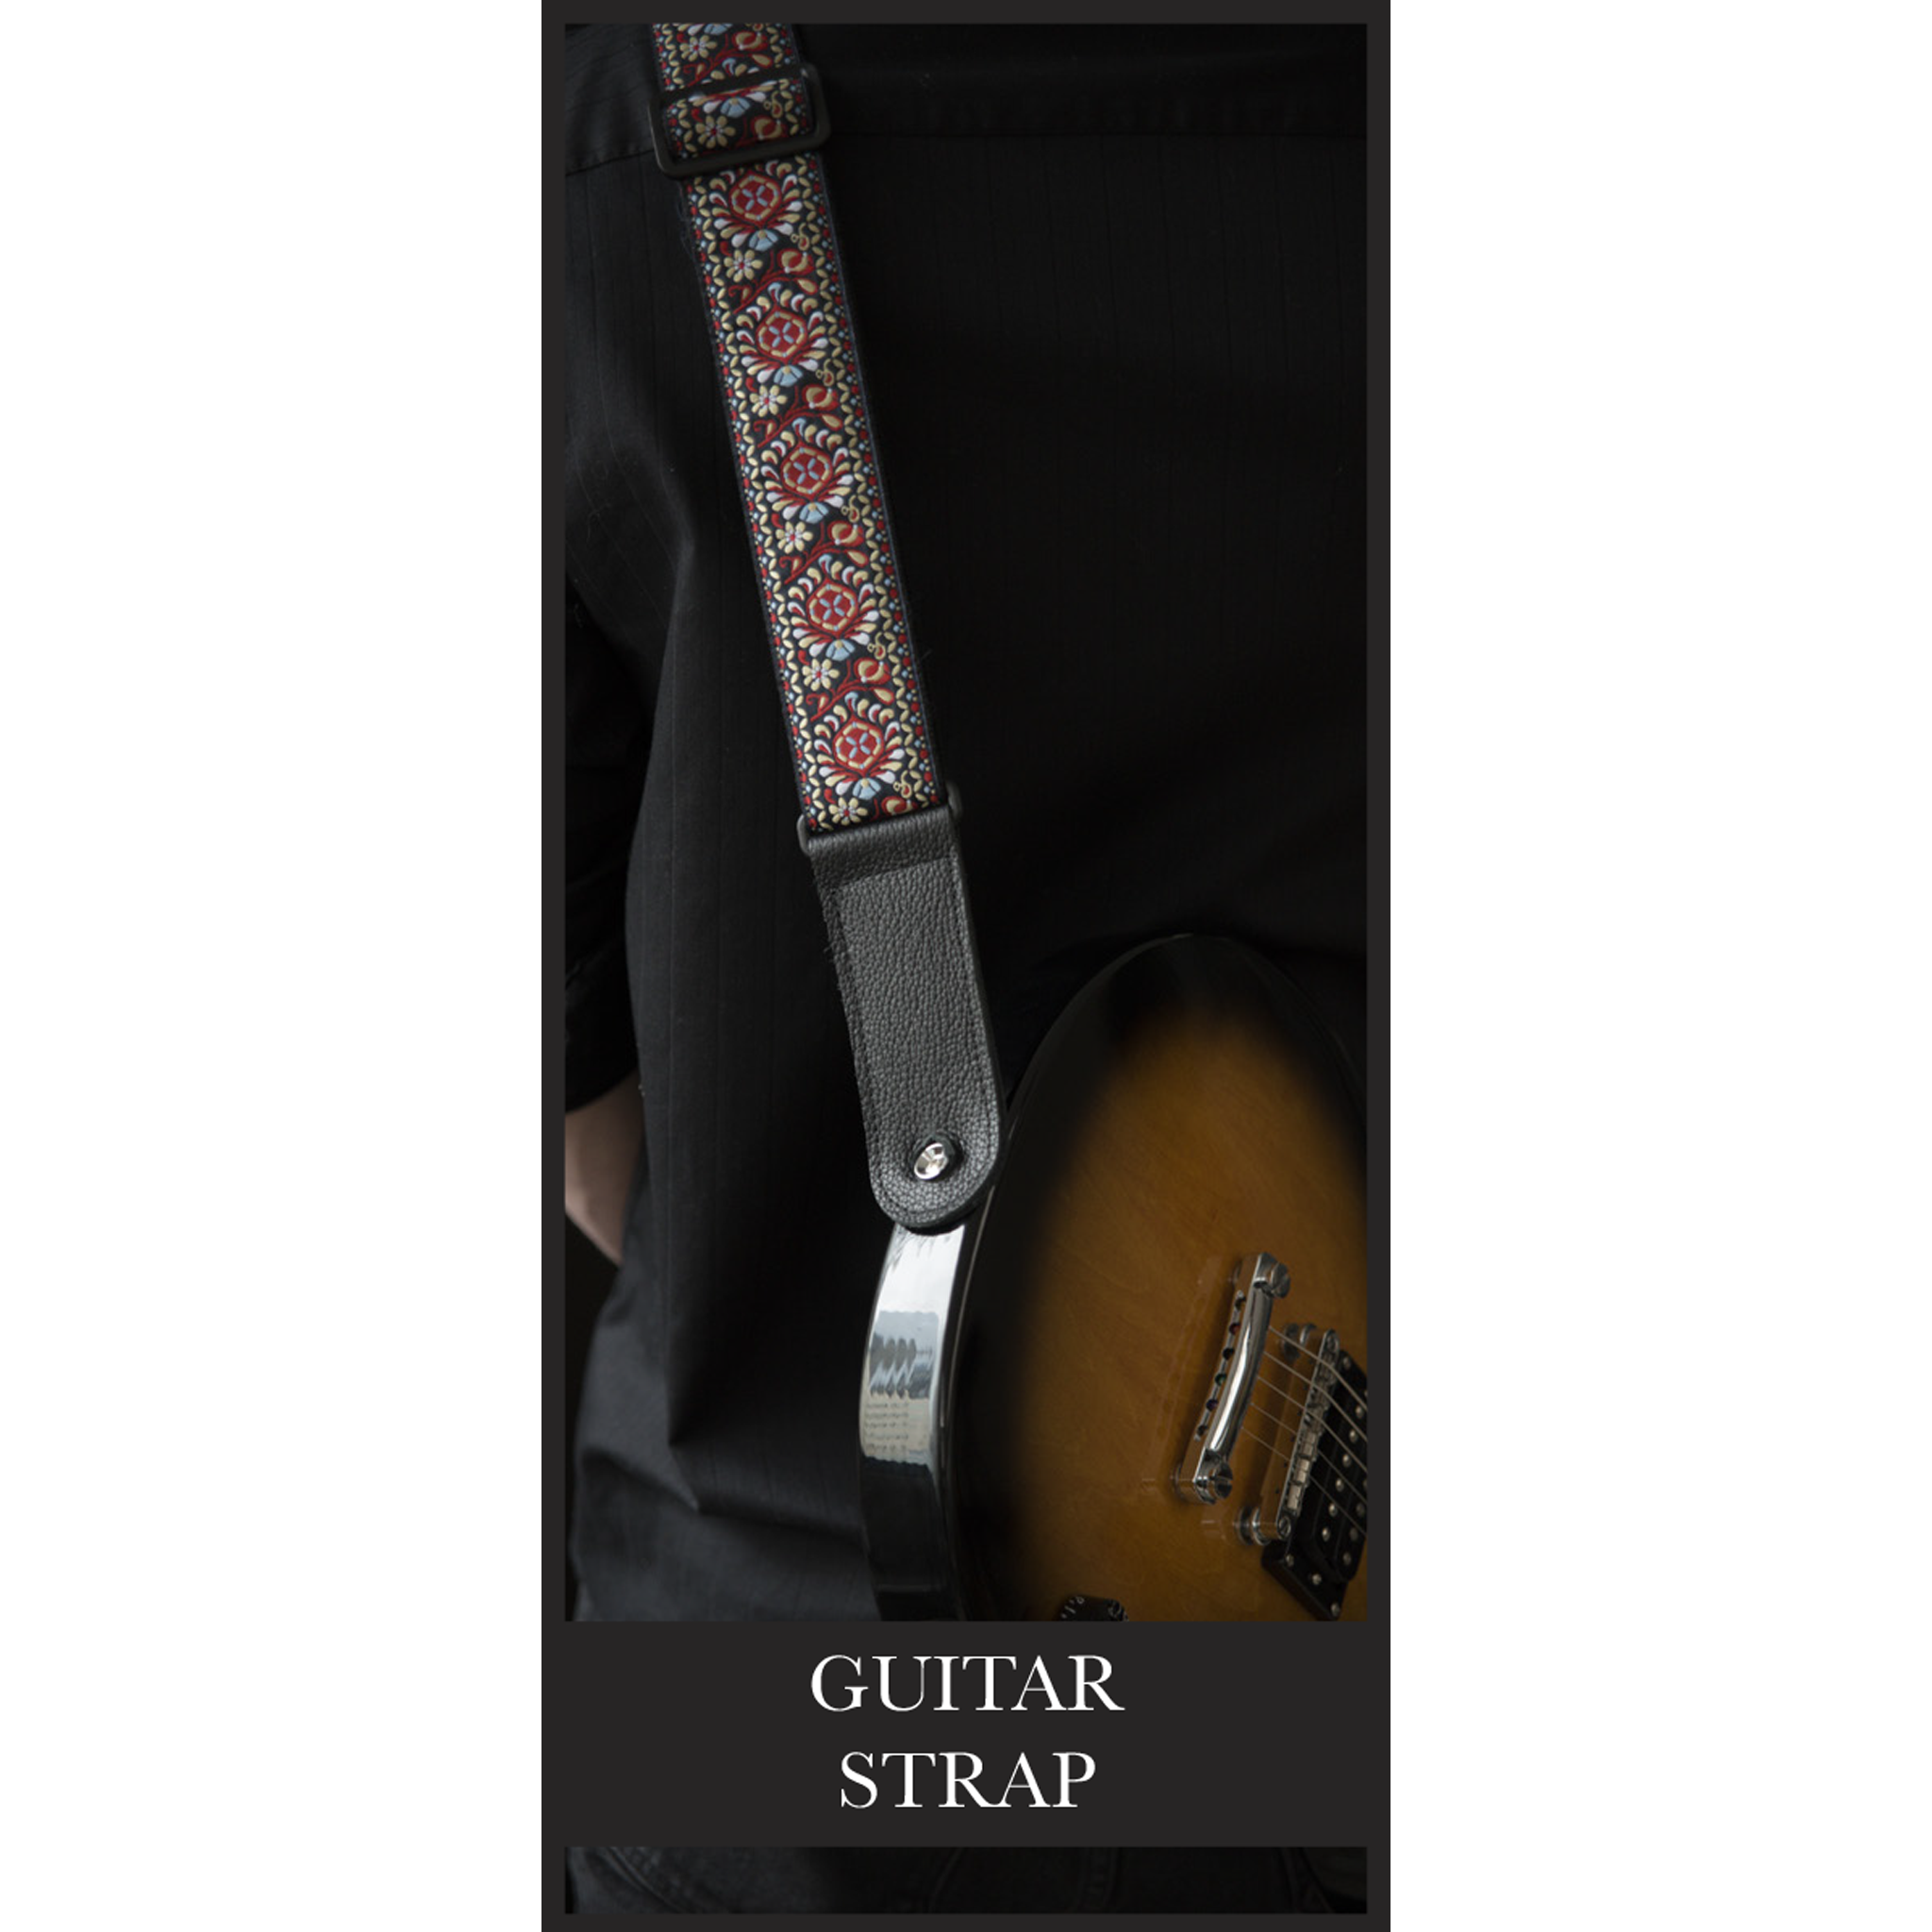 My Fave Guitar Strap